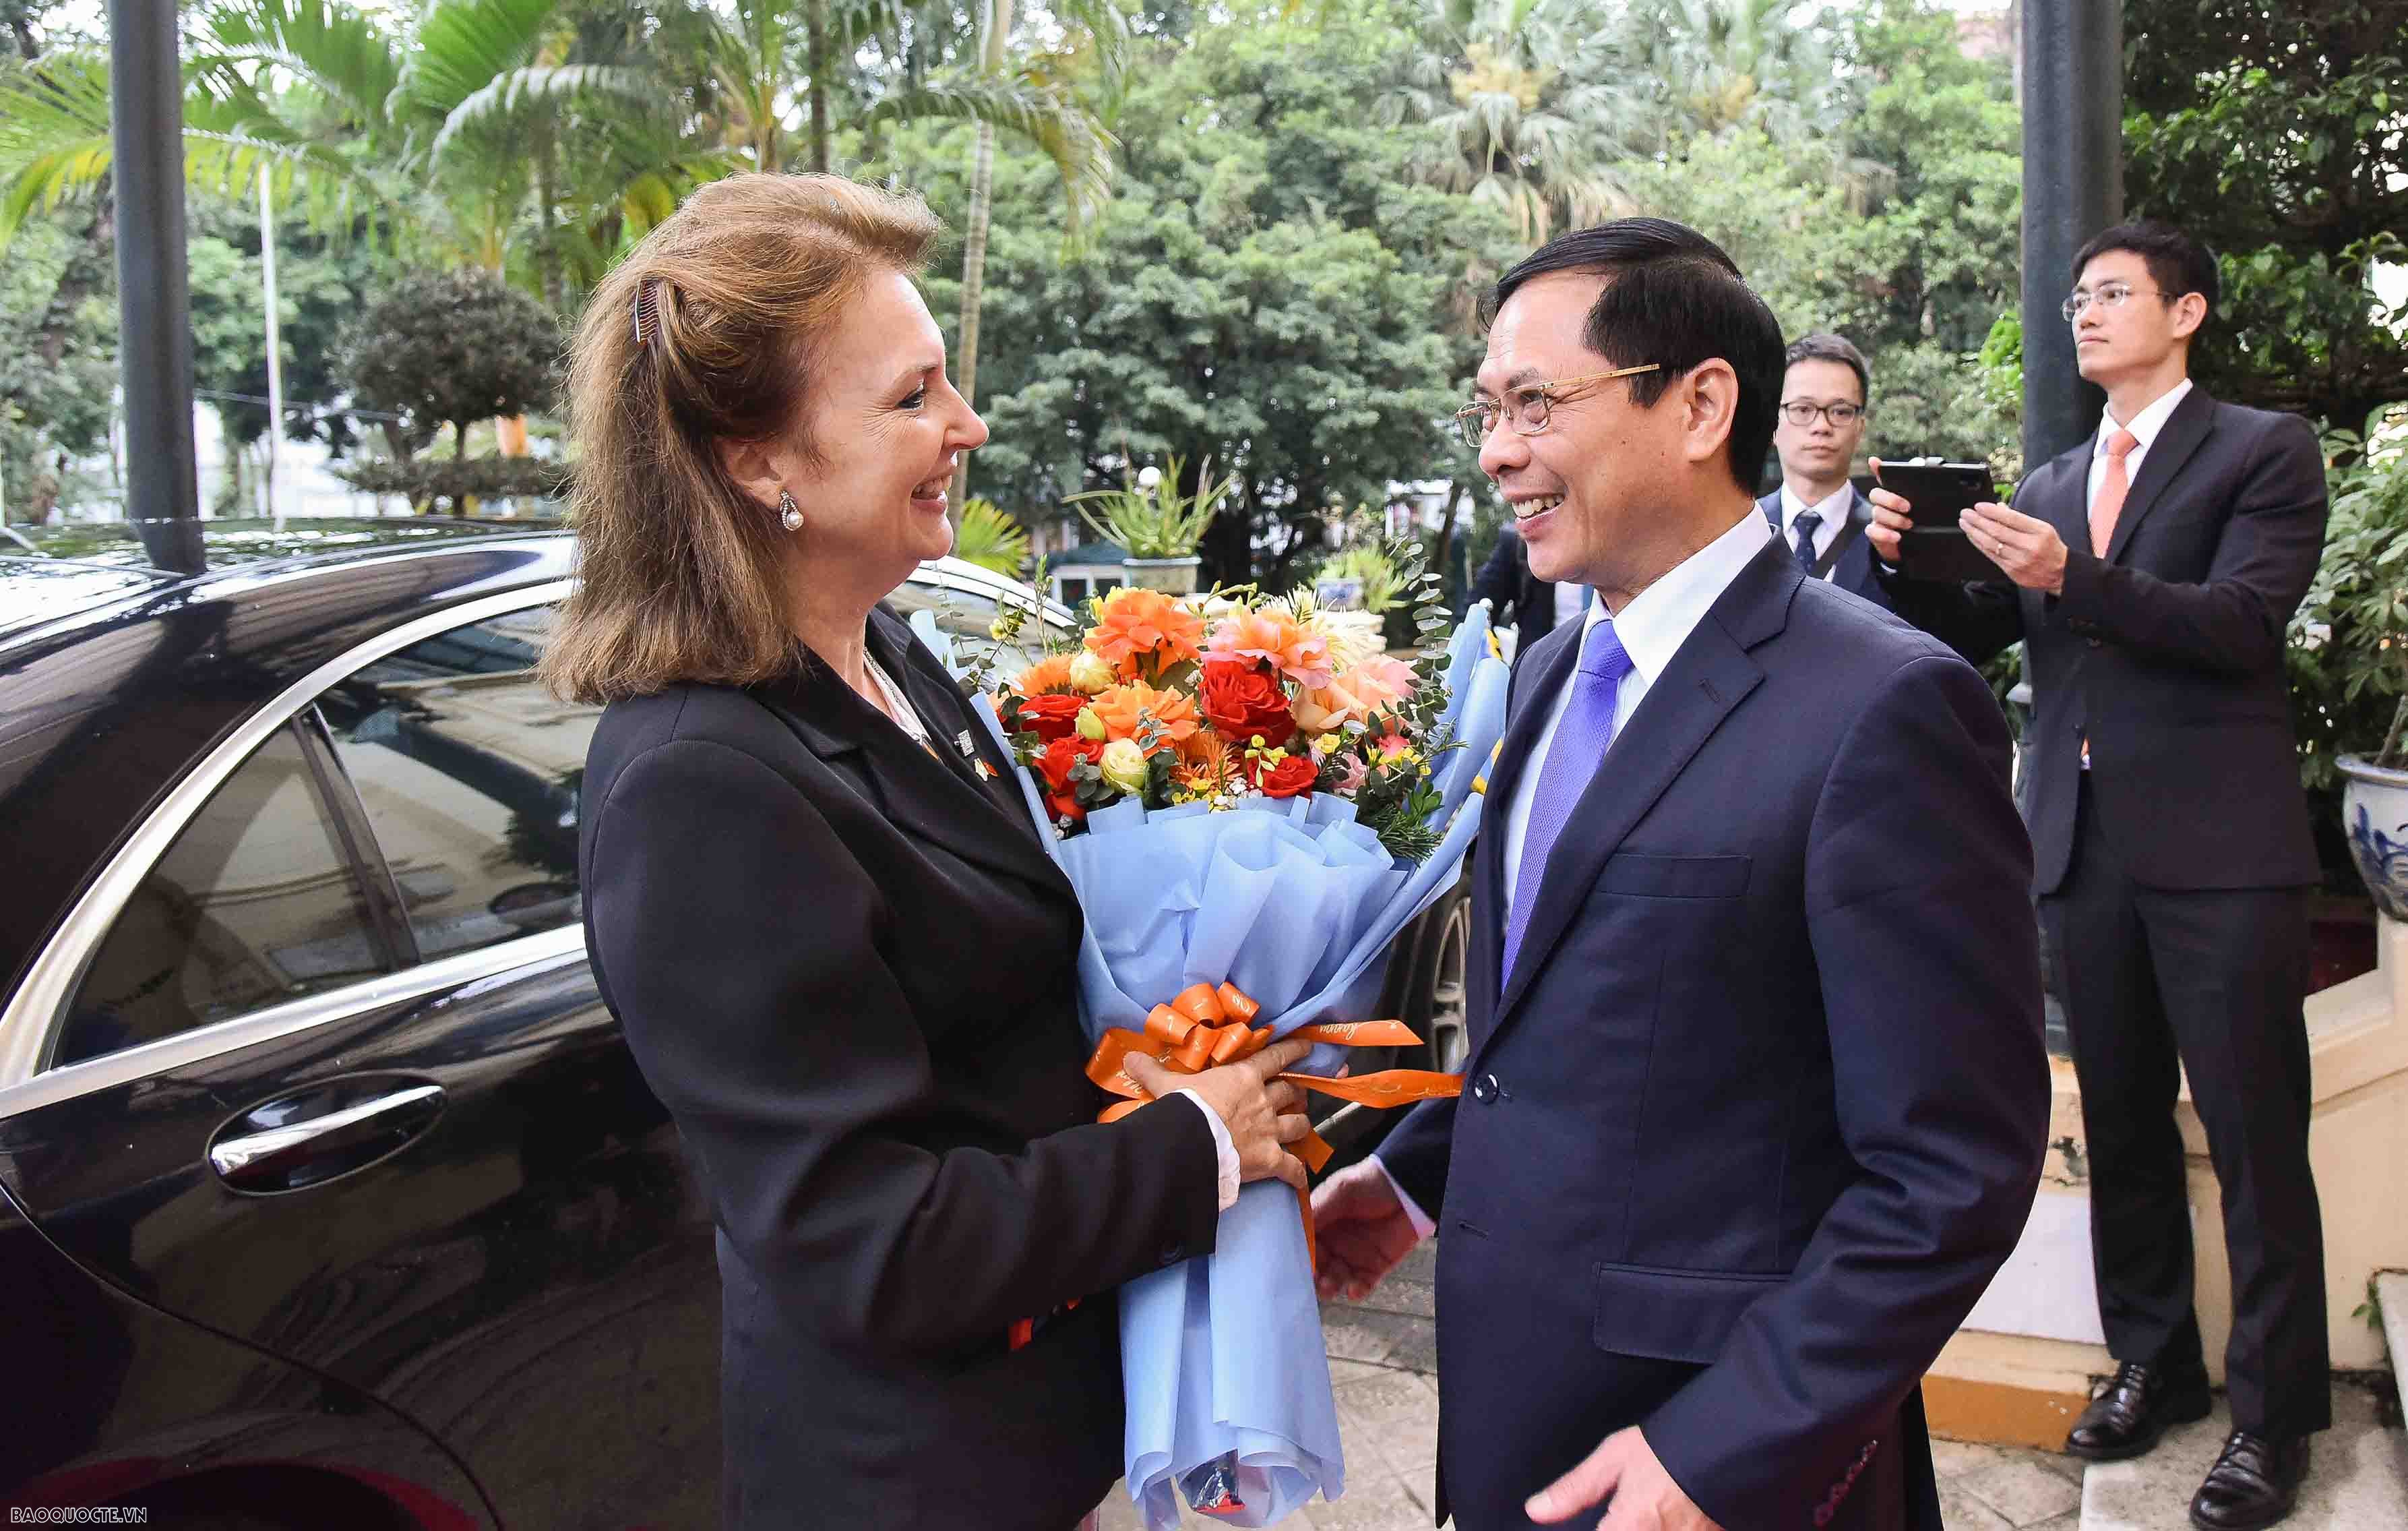 Vietnam, Argentina Foreign Ministers hold talks to expand cooperation relations